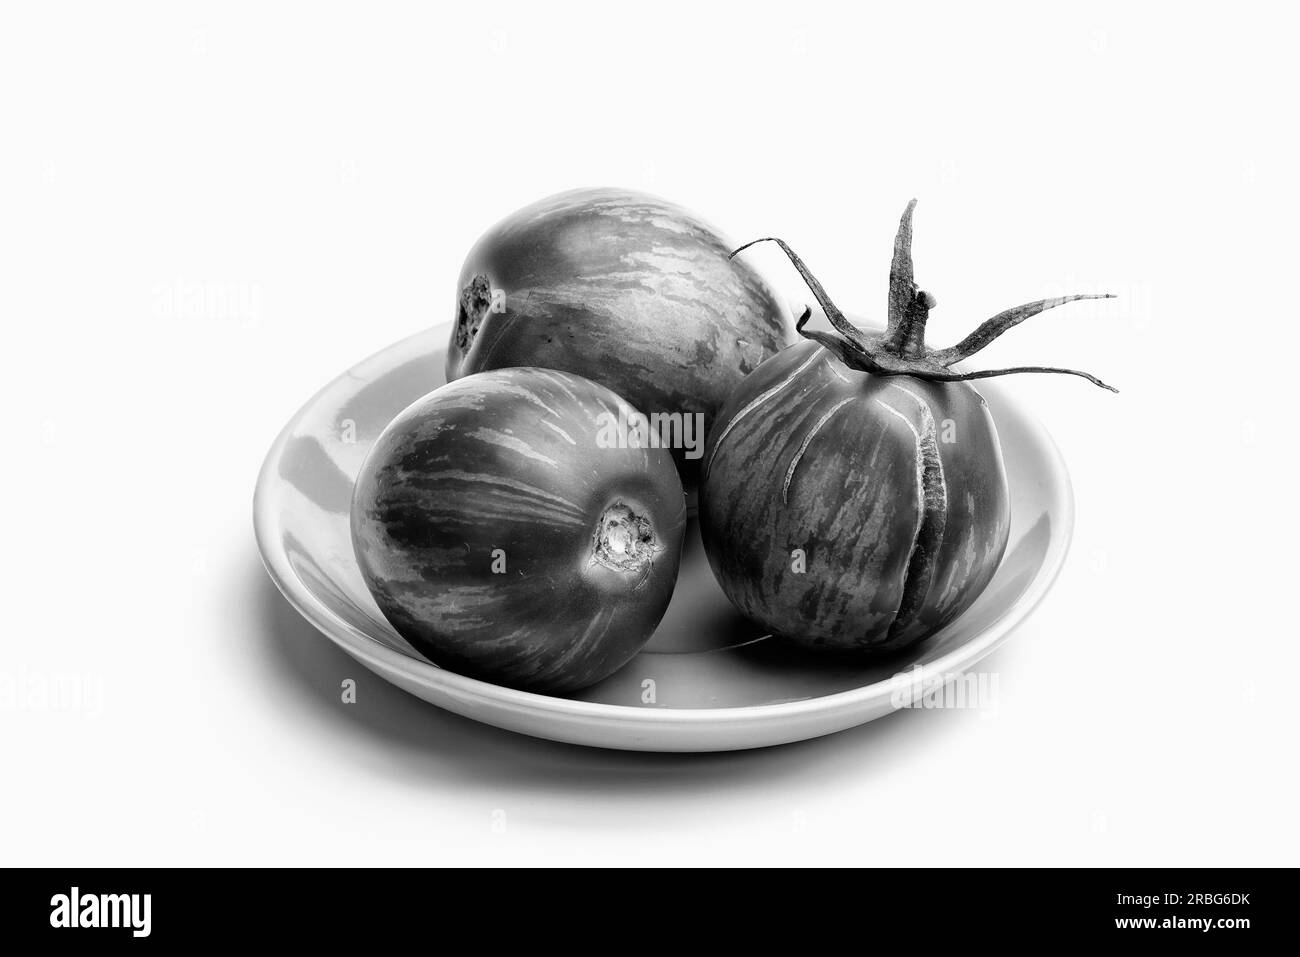 Three juicy zebra tomatoes in a little porcelain plate, isolated on white background Stock Photo